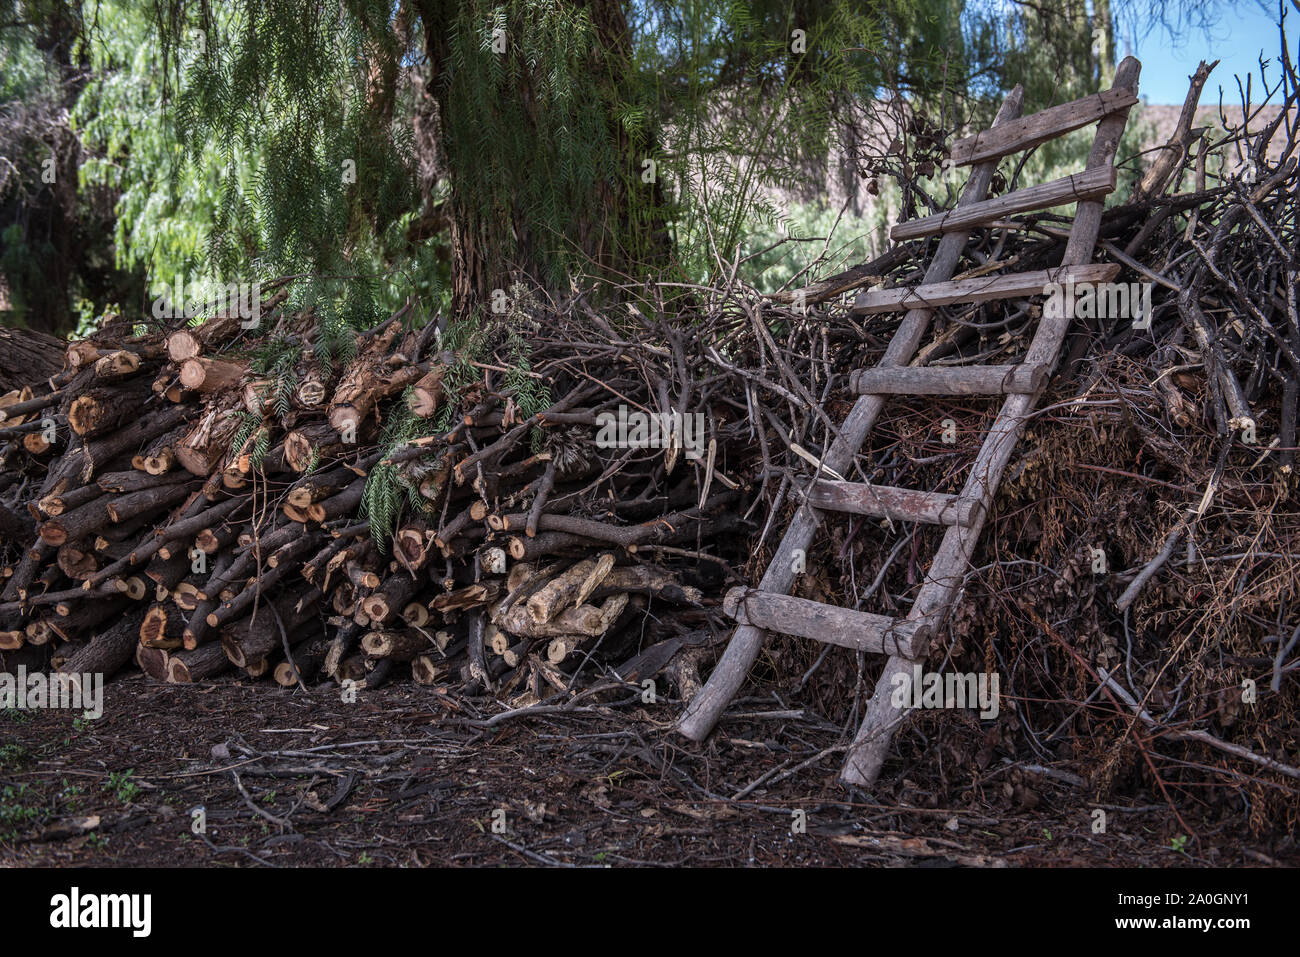 Pile od trunks and rustic ladder. taken in Jujuy Province, Argentina Stock Photo